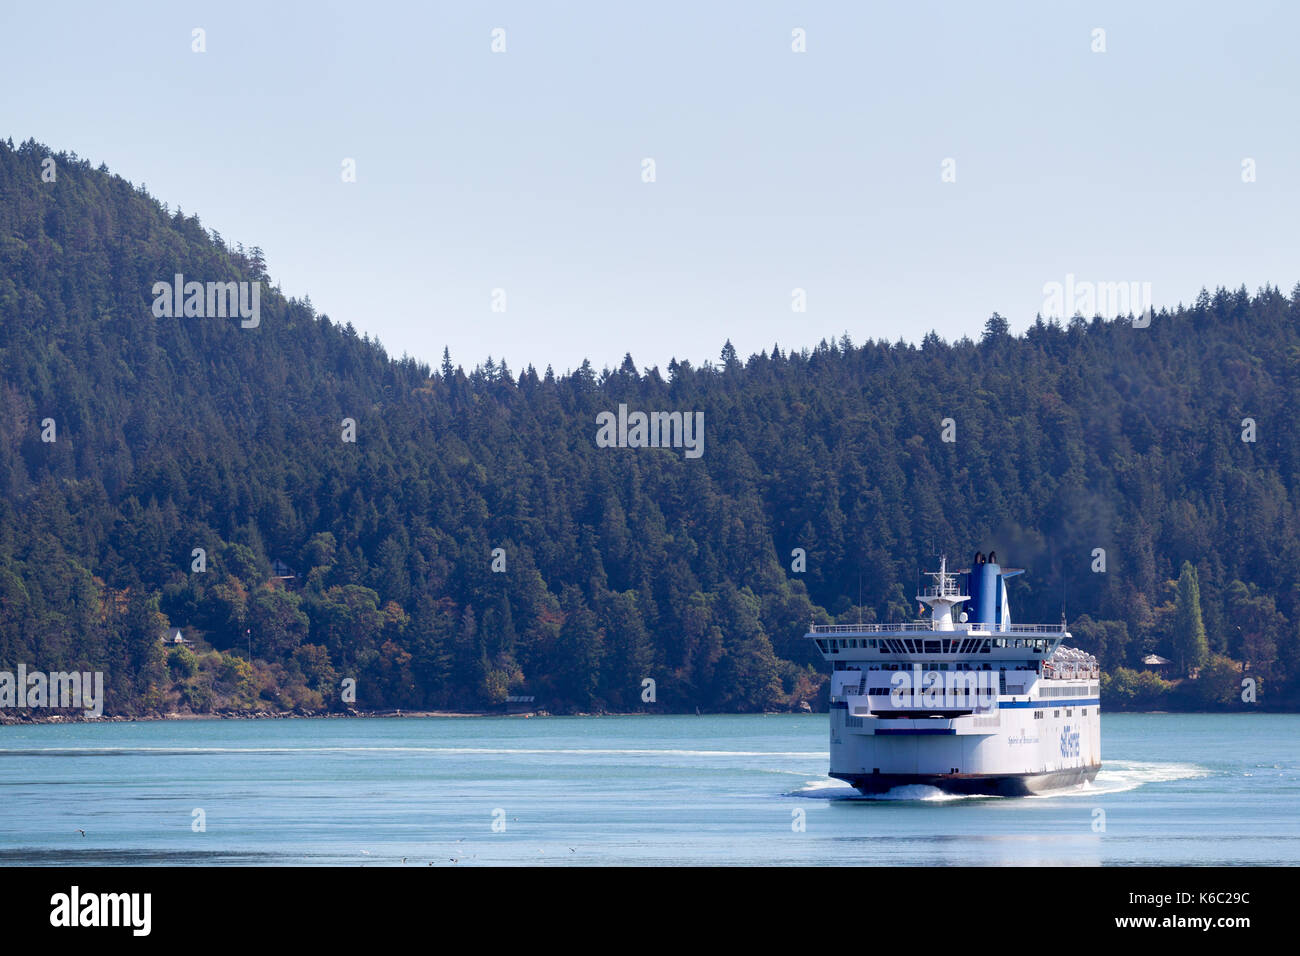 The Spirit of British Columbia, a ferry of BC Ferries, between the Gulf Islands at Vancouver Island, British Columbia, Canada. Stock Photo